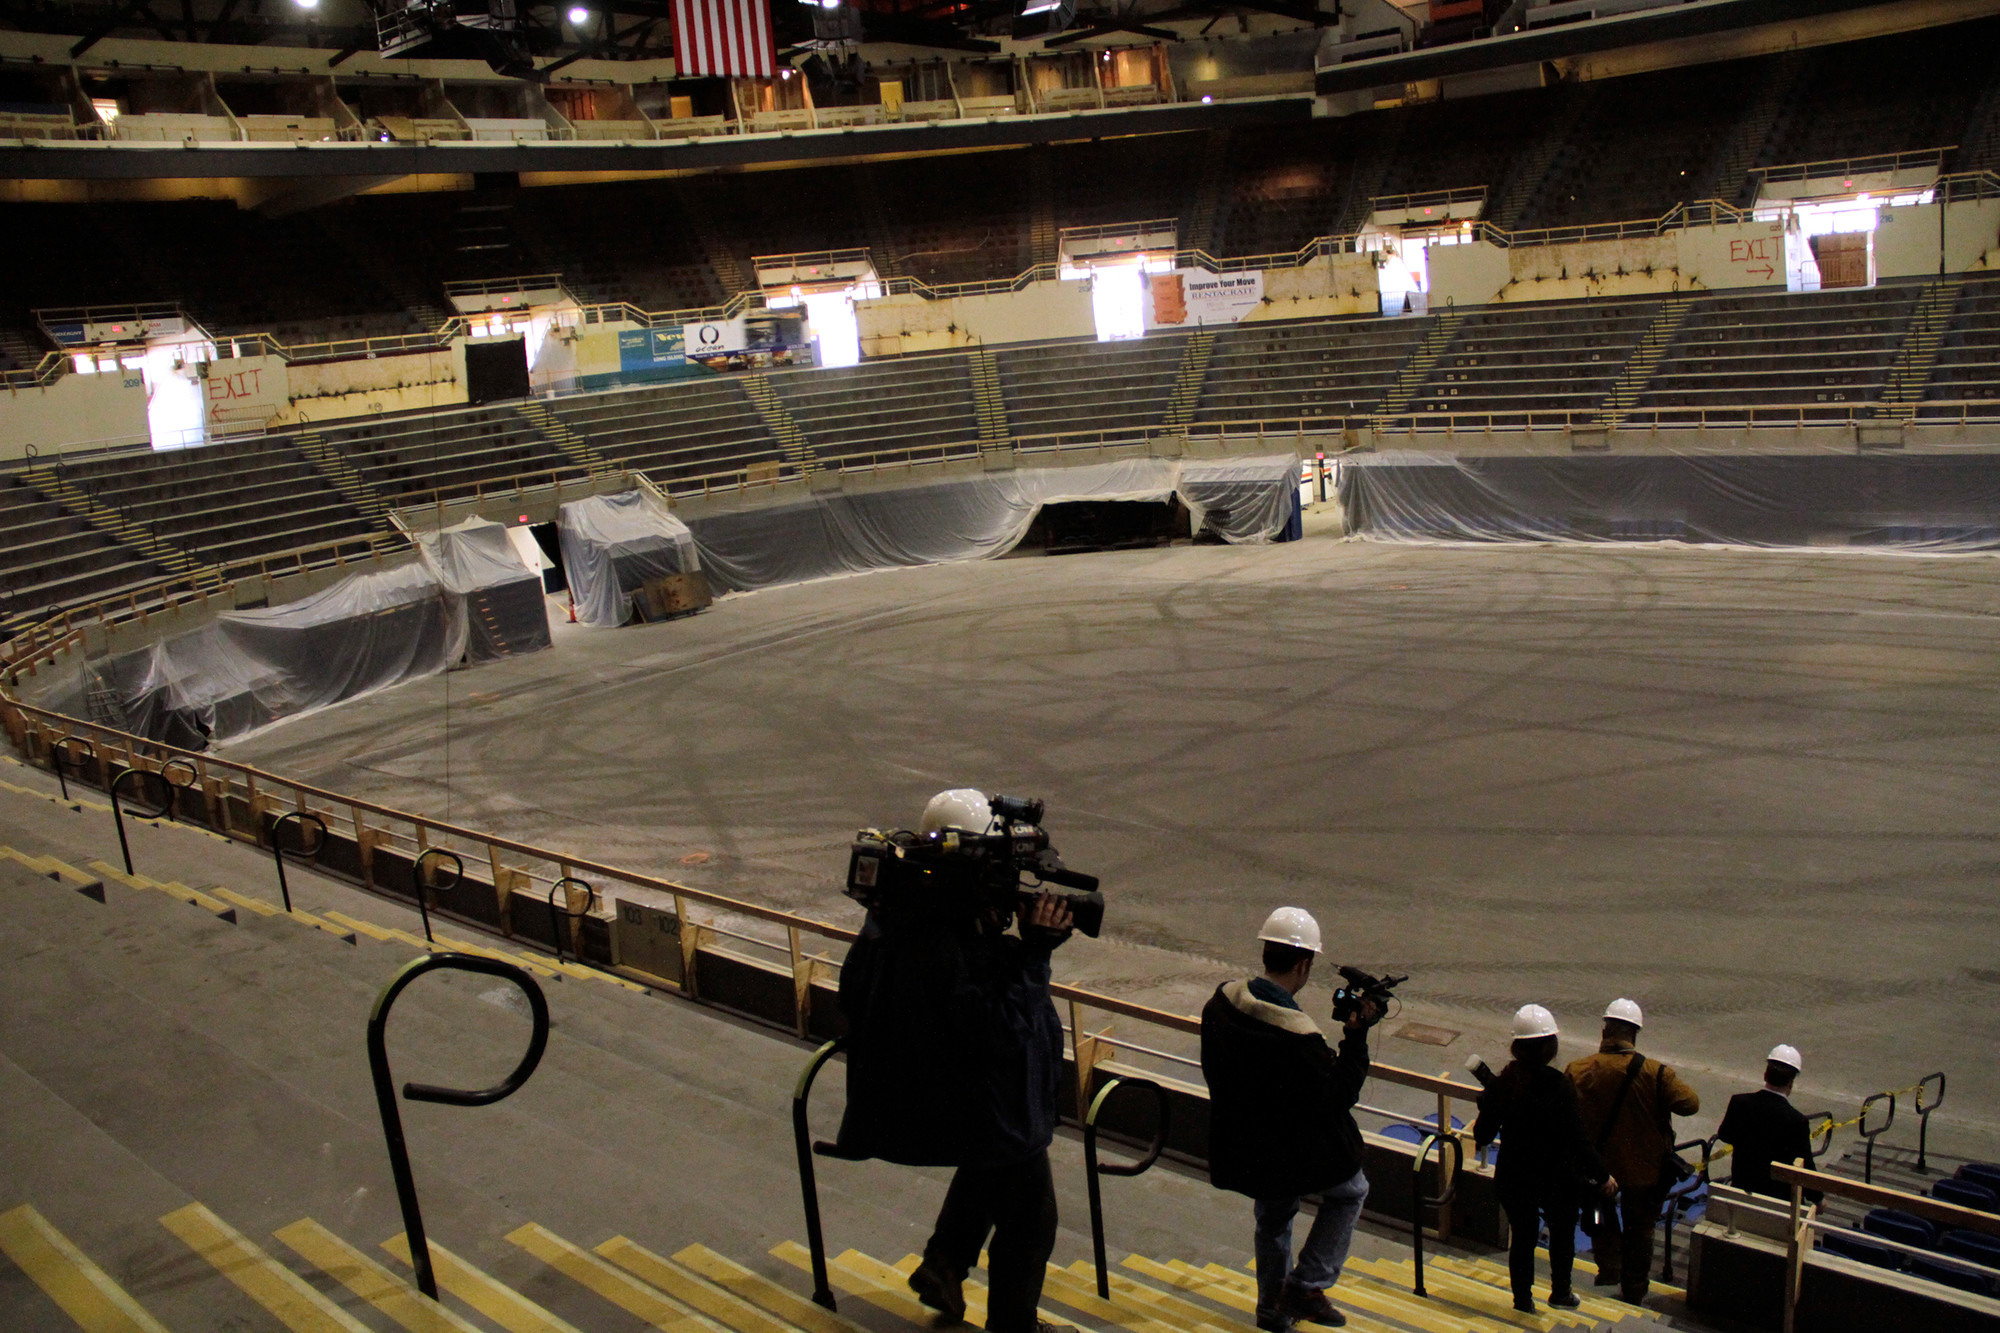 News crews got a glimpse of the empty bowl of the Nassau Veterans Memorial Coliseum, which is under construction.